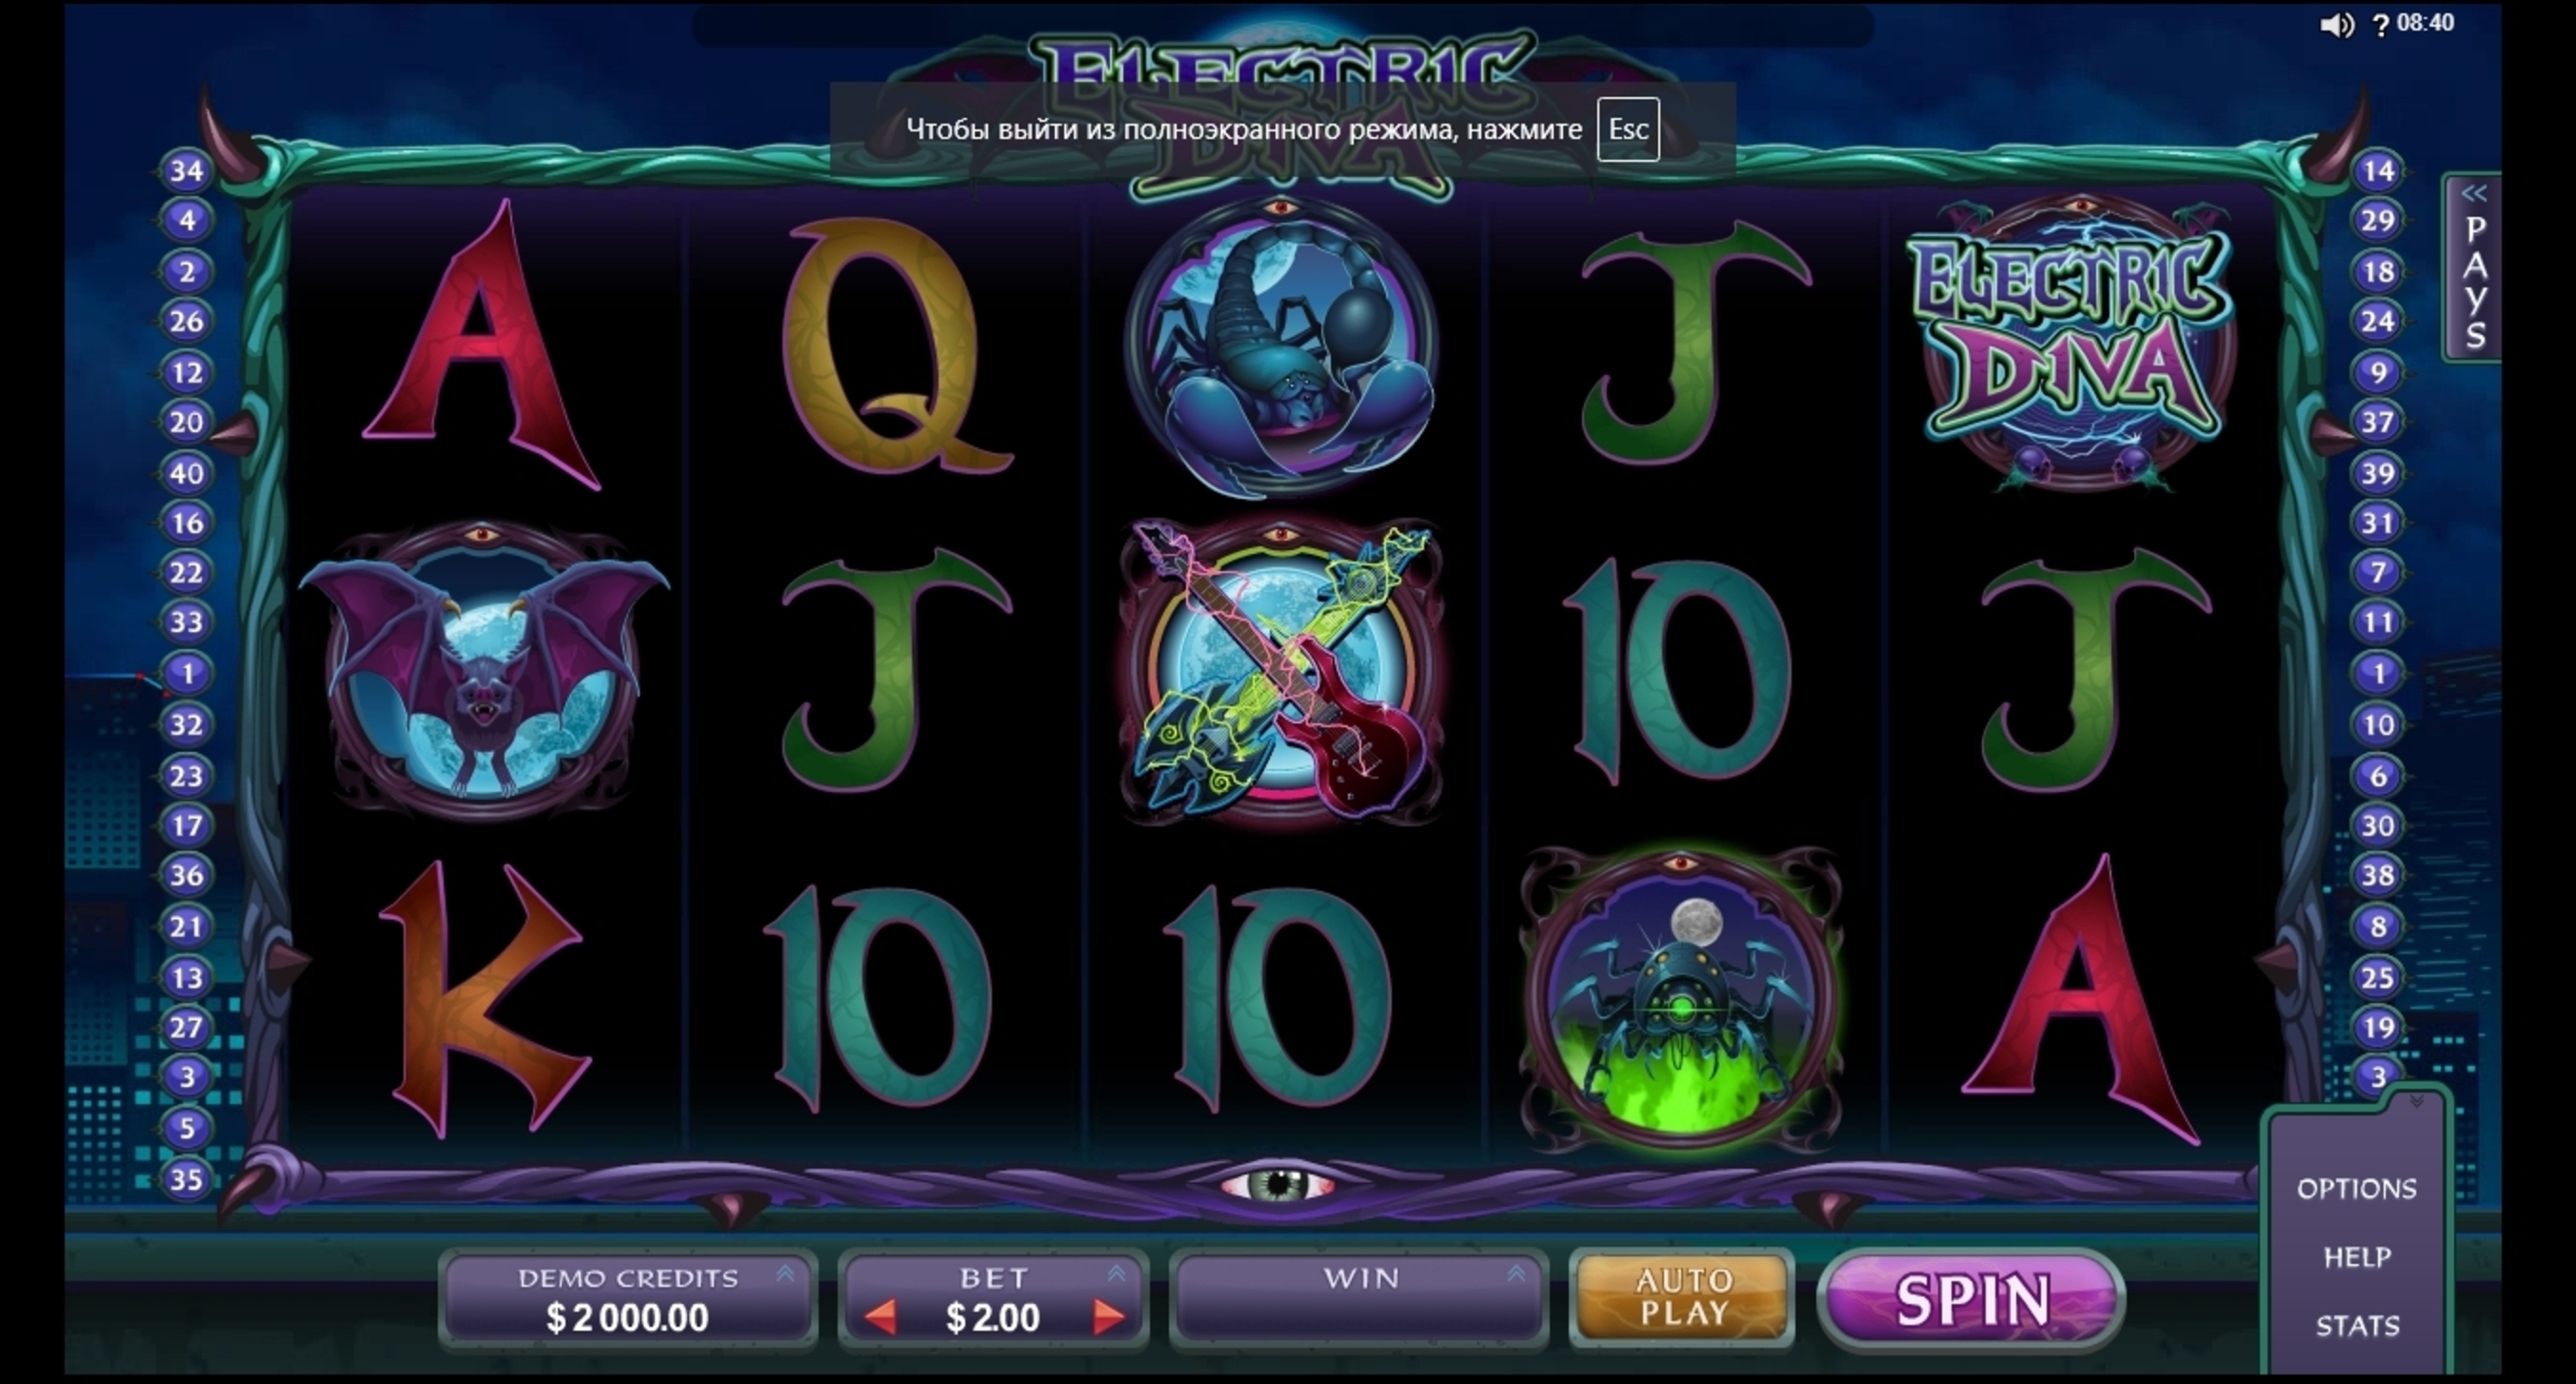 Reels in Electric Diva Slot Game by MahiGaming